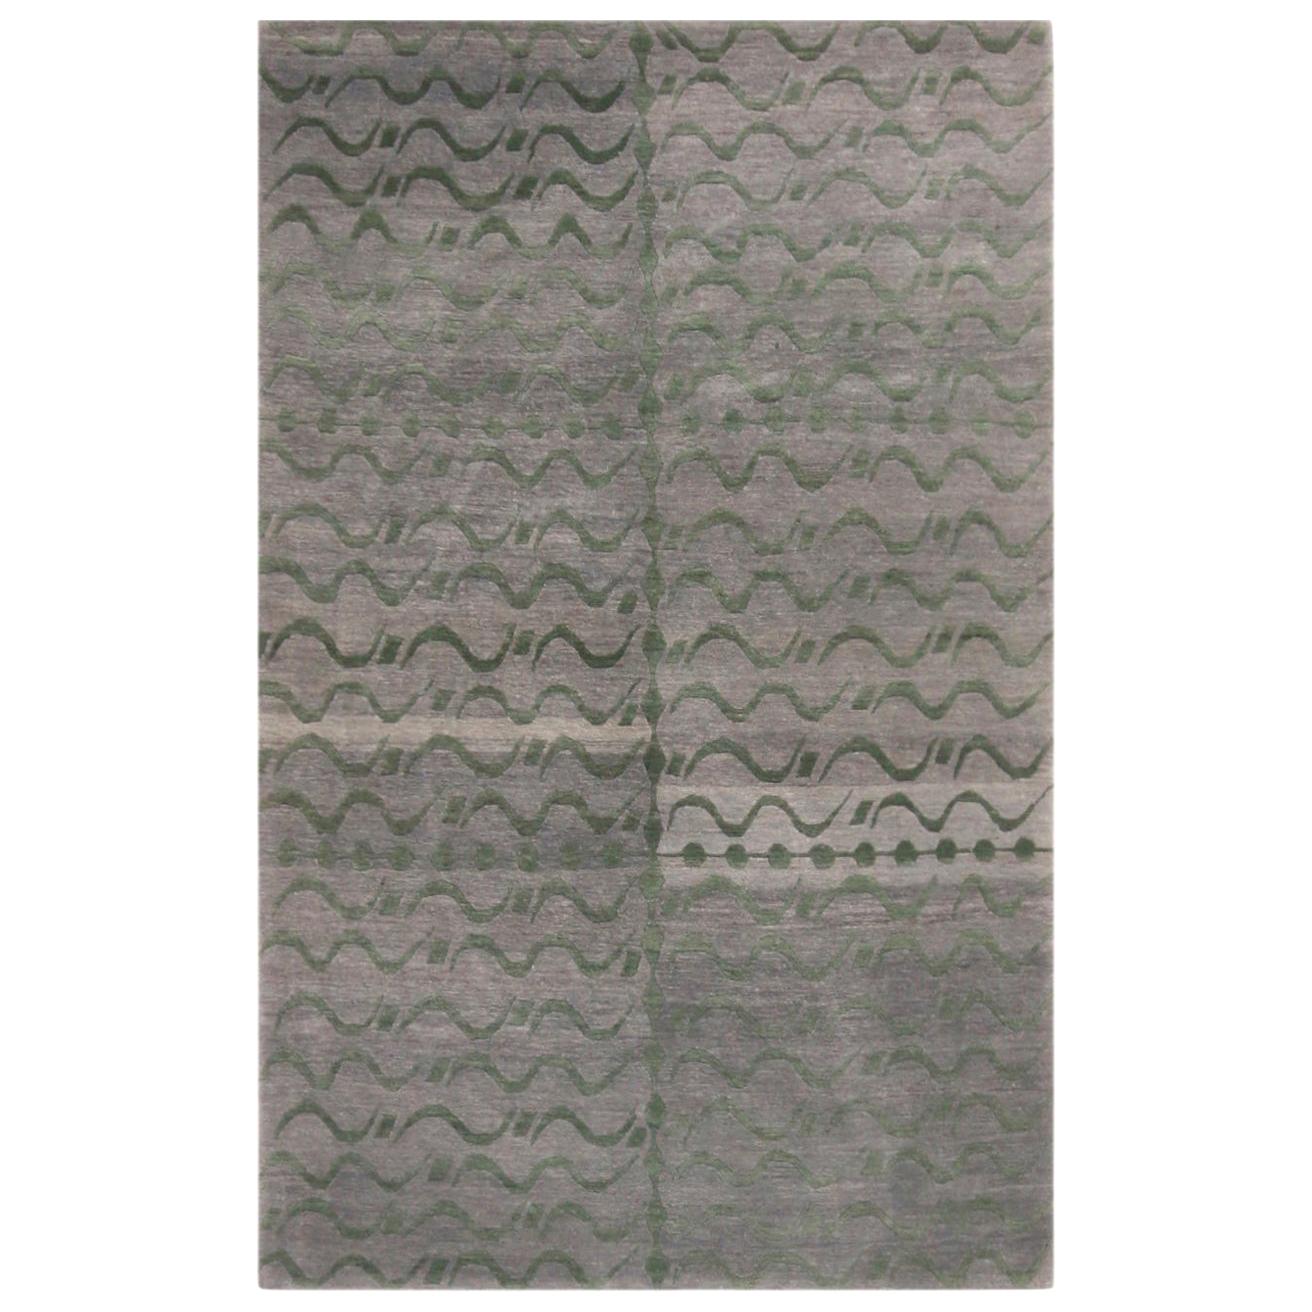 Rug & Kilim's Contemporary Youngste Design Silver-Gray and Green Wool Rug